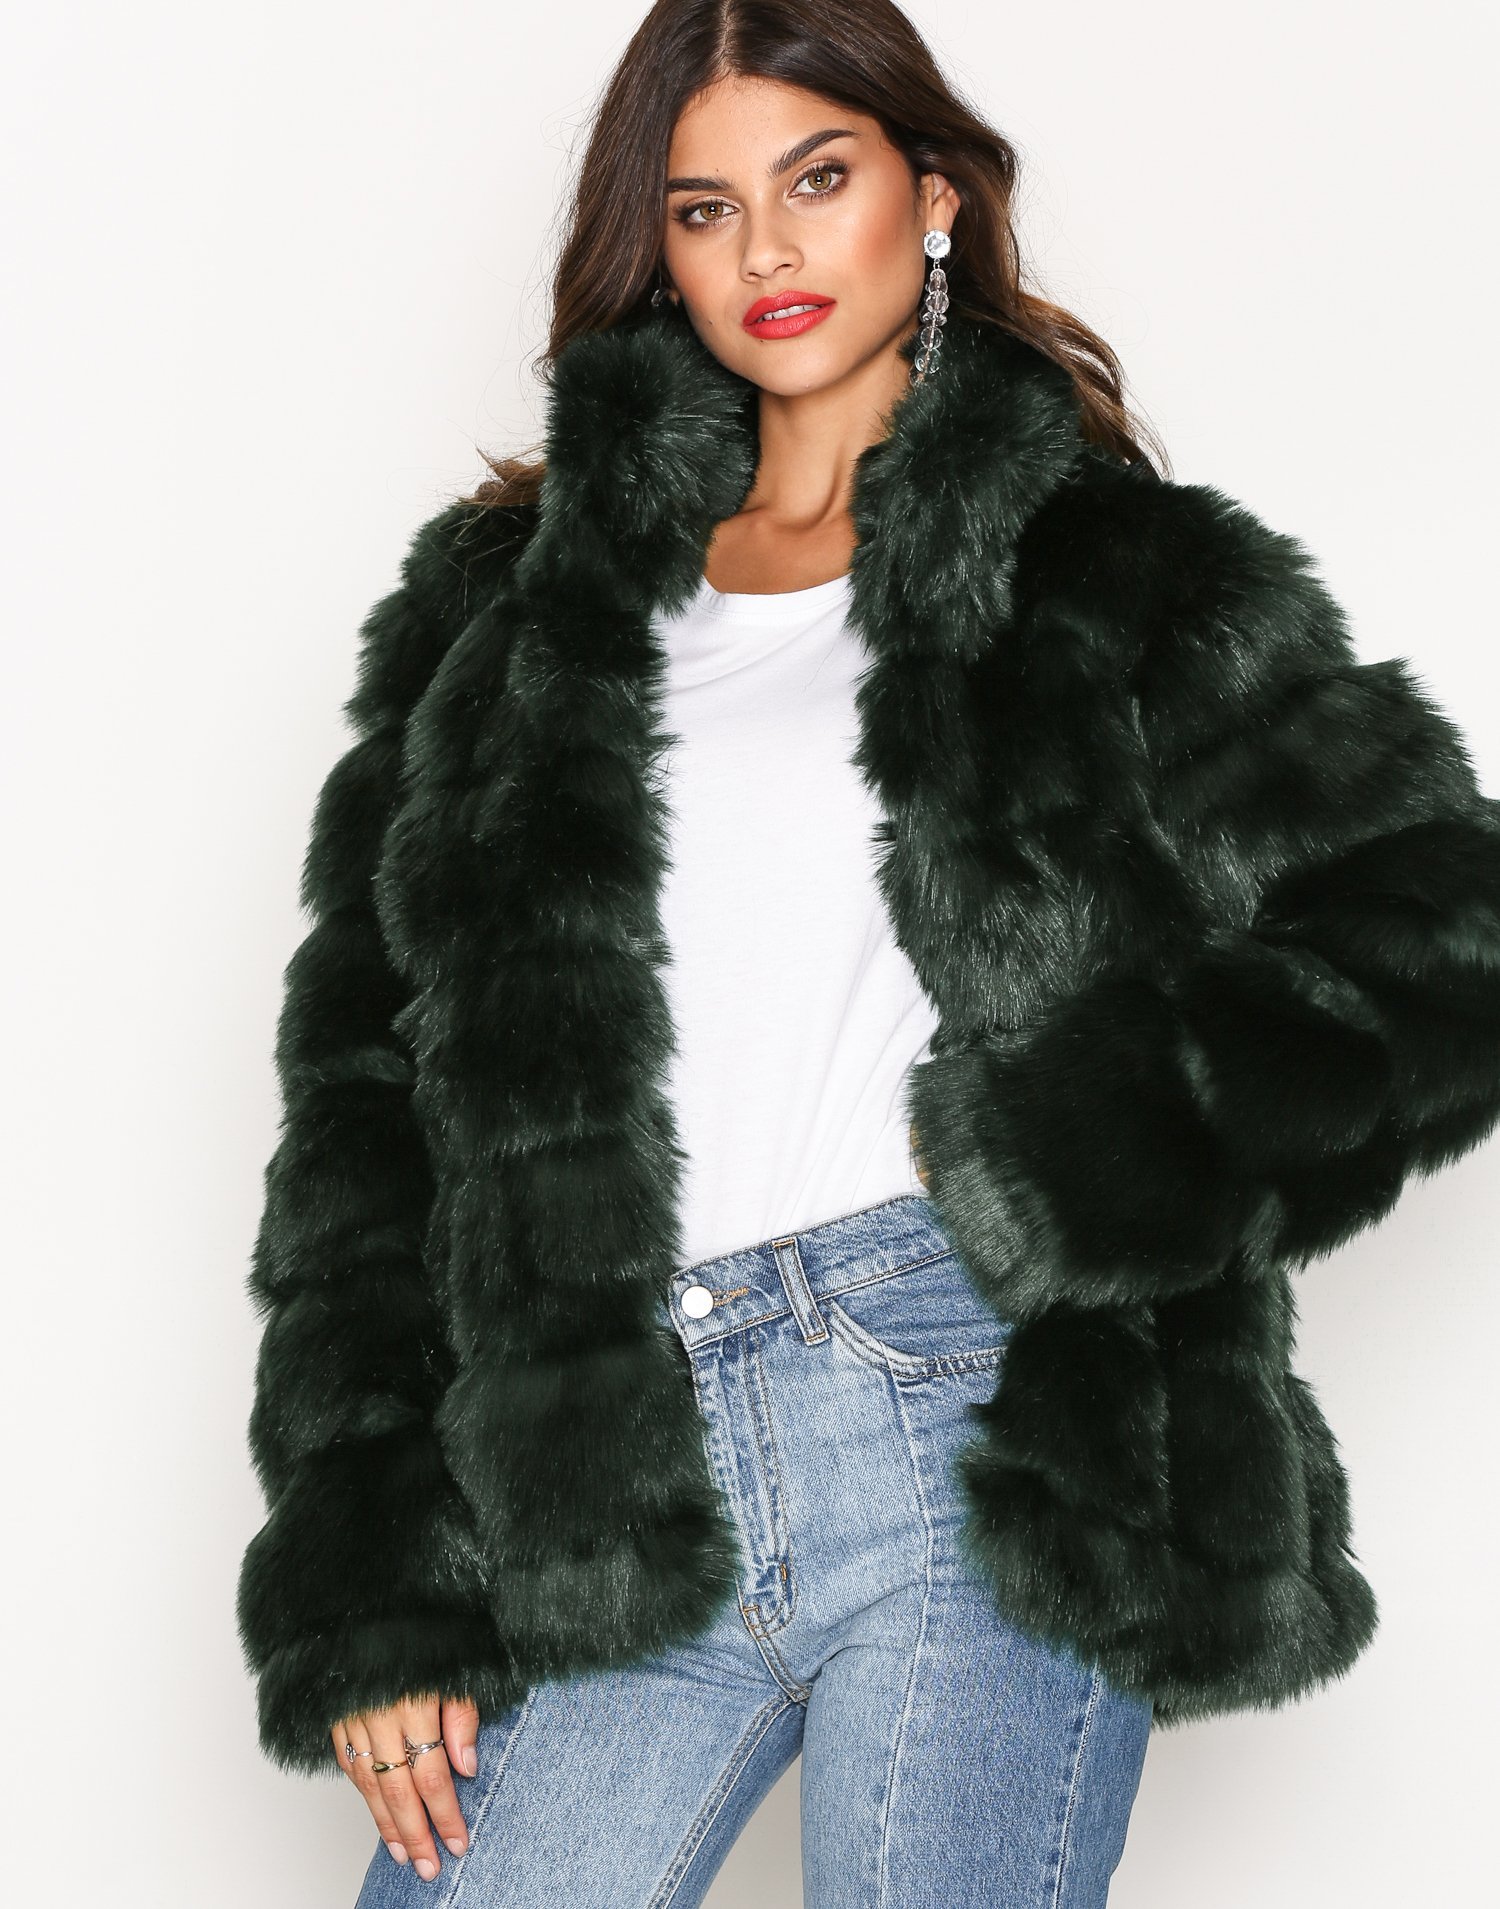 Puffy Fur Coat - Nly Trend - Green - Jackets - Clothing - Women - Nelly.com